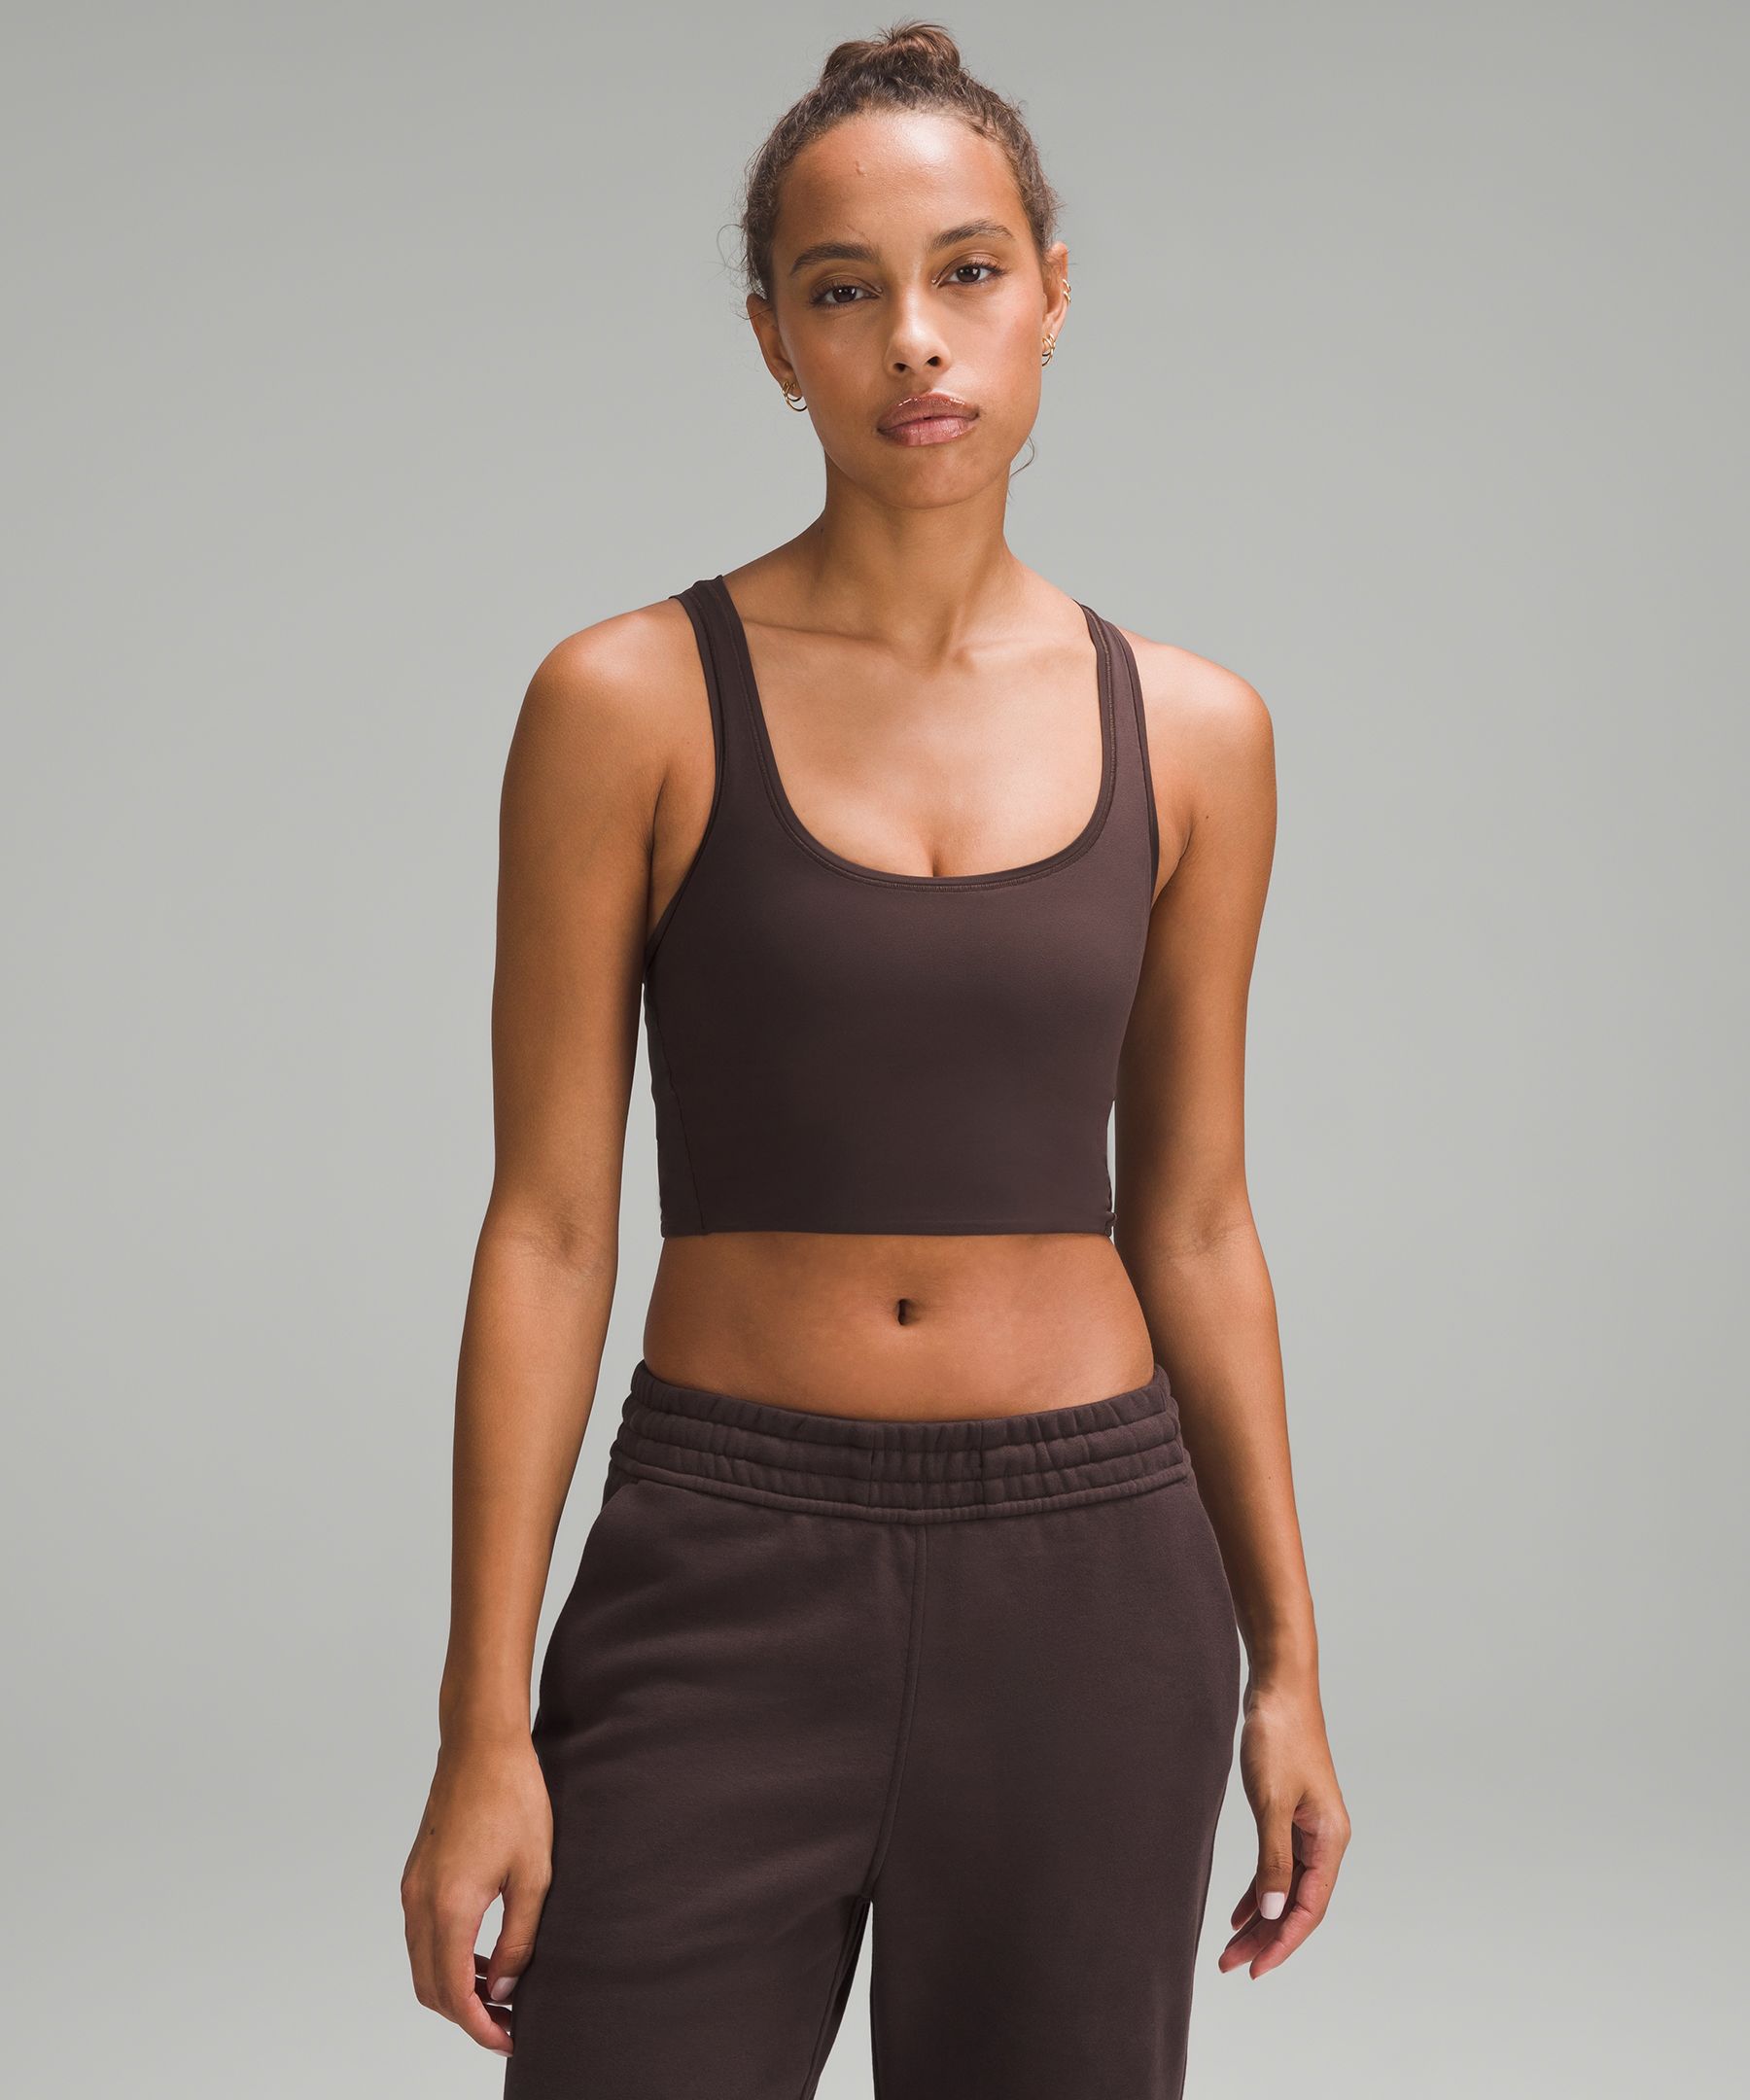 Lululemon Tank Top With Attached Sports Bra Black Size XS - $28 (44% Off  Retail) - From Rianna